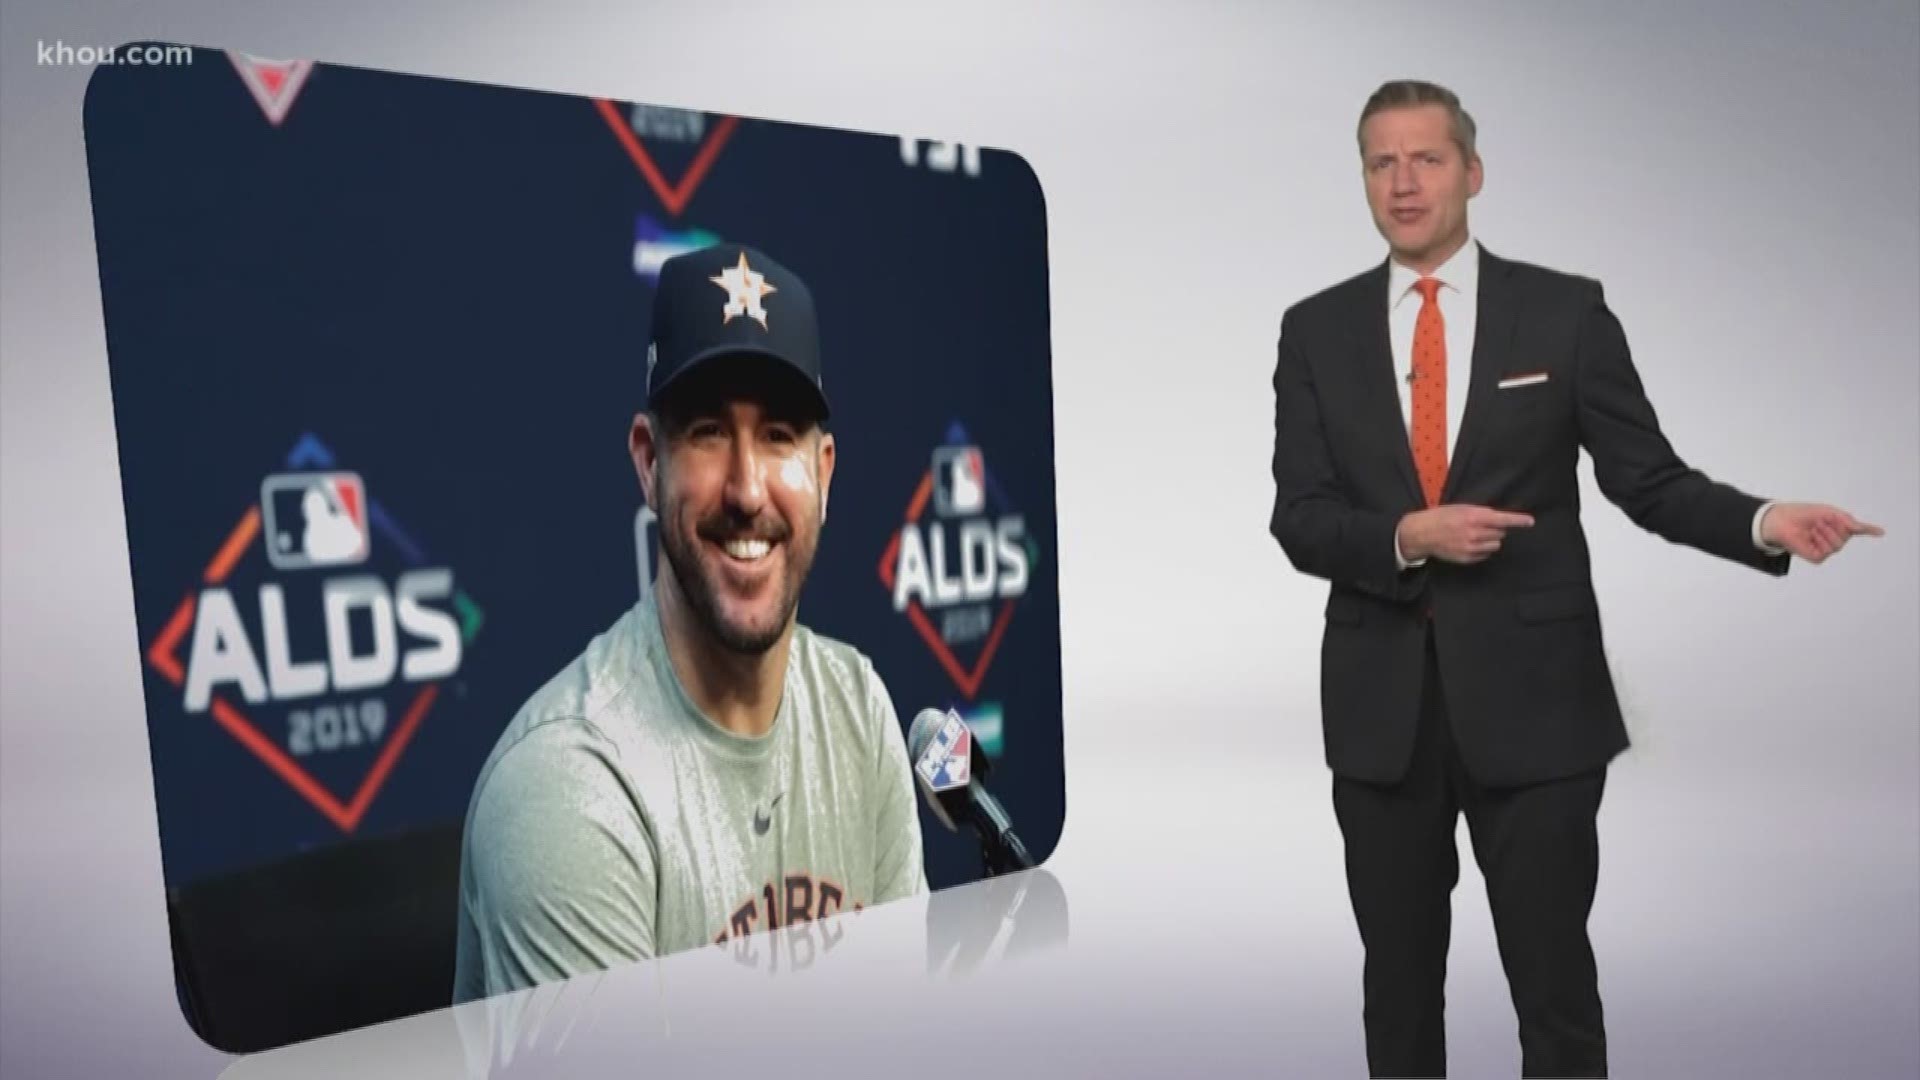 Jason Bristol takes a look at how playoff pitchers historically have performed on just three days rest as Justin Verlander is set to take the mound for the Astros.